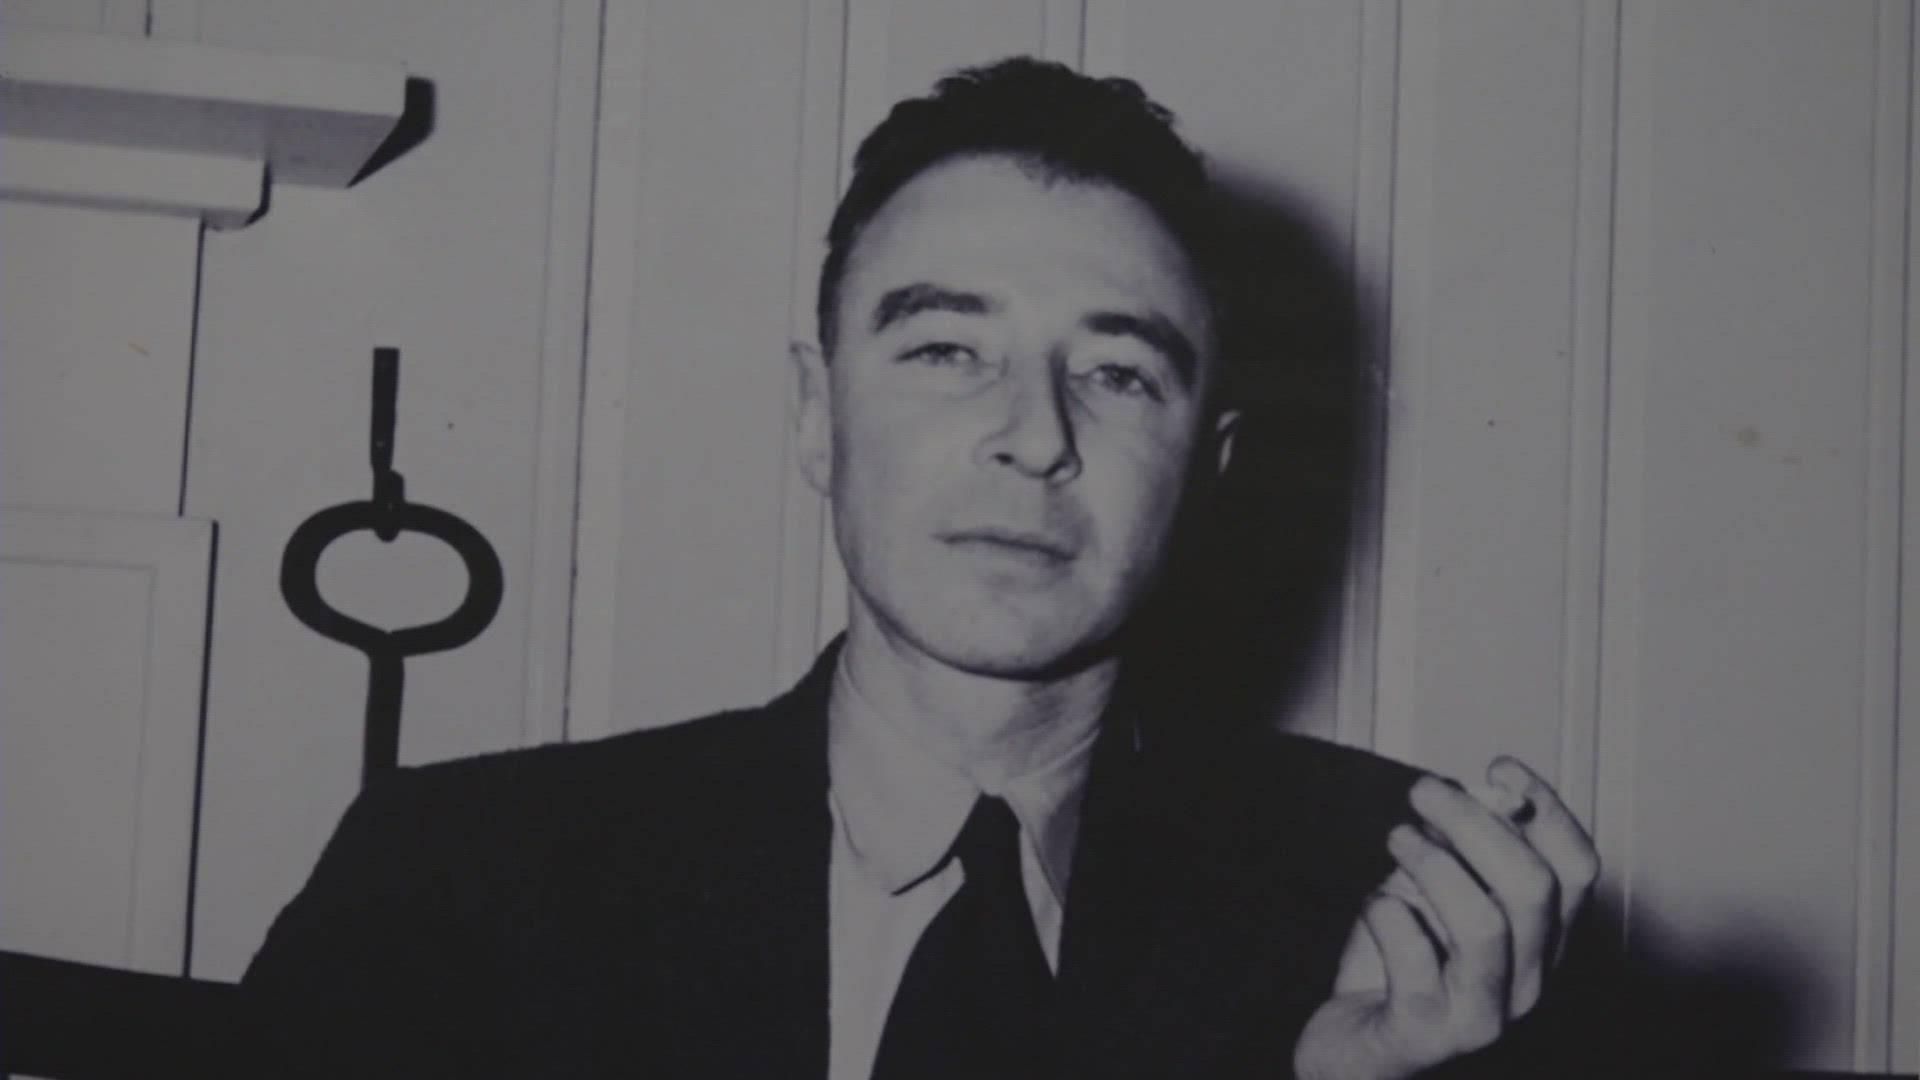 "Oppenheimer" is set to release on July 21 and tells the story of Robert Oppenheimer's work on the atomic bomb.